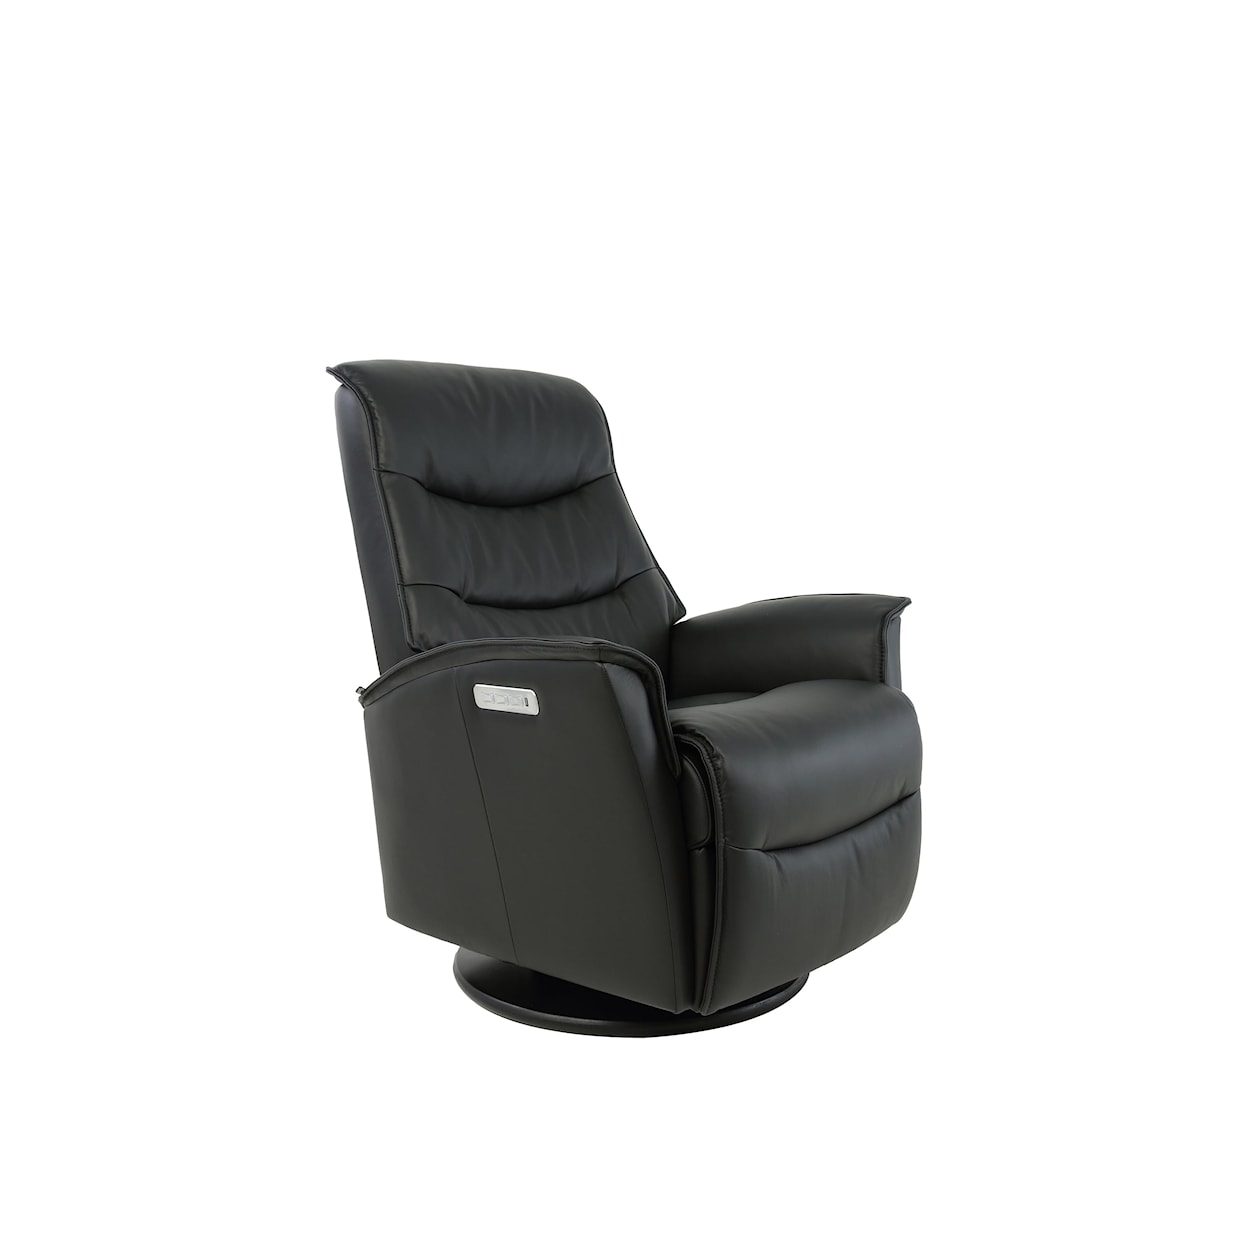 Fjords by Hjellegjerde Relax Collection Dallas Small Swing Recliner